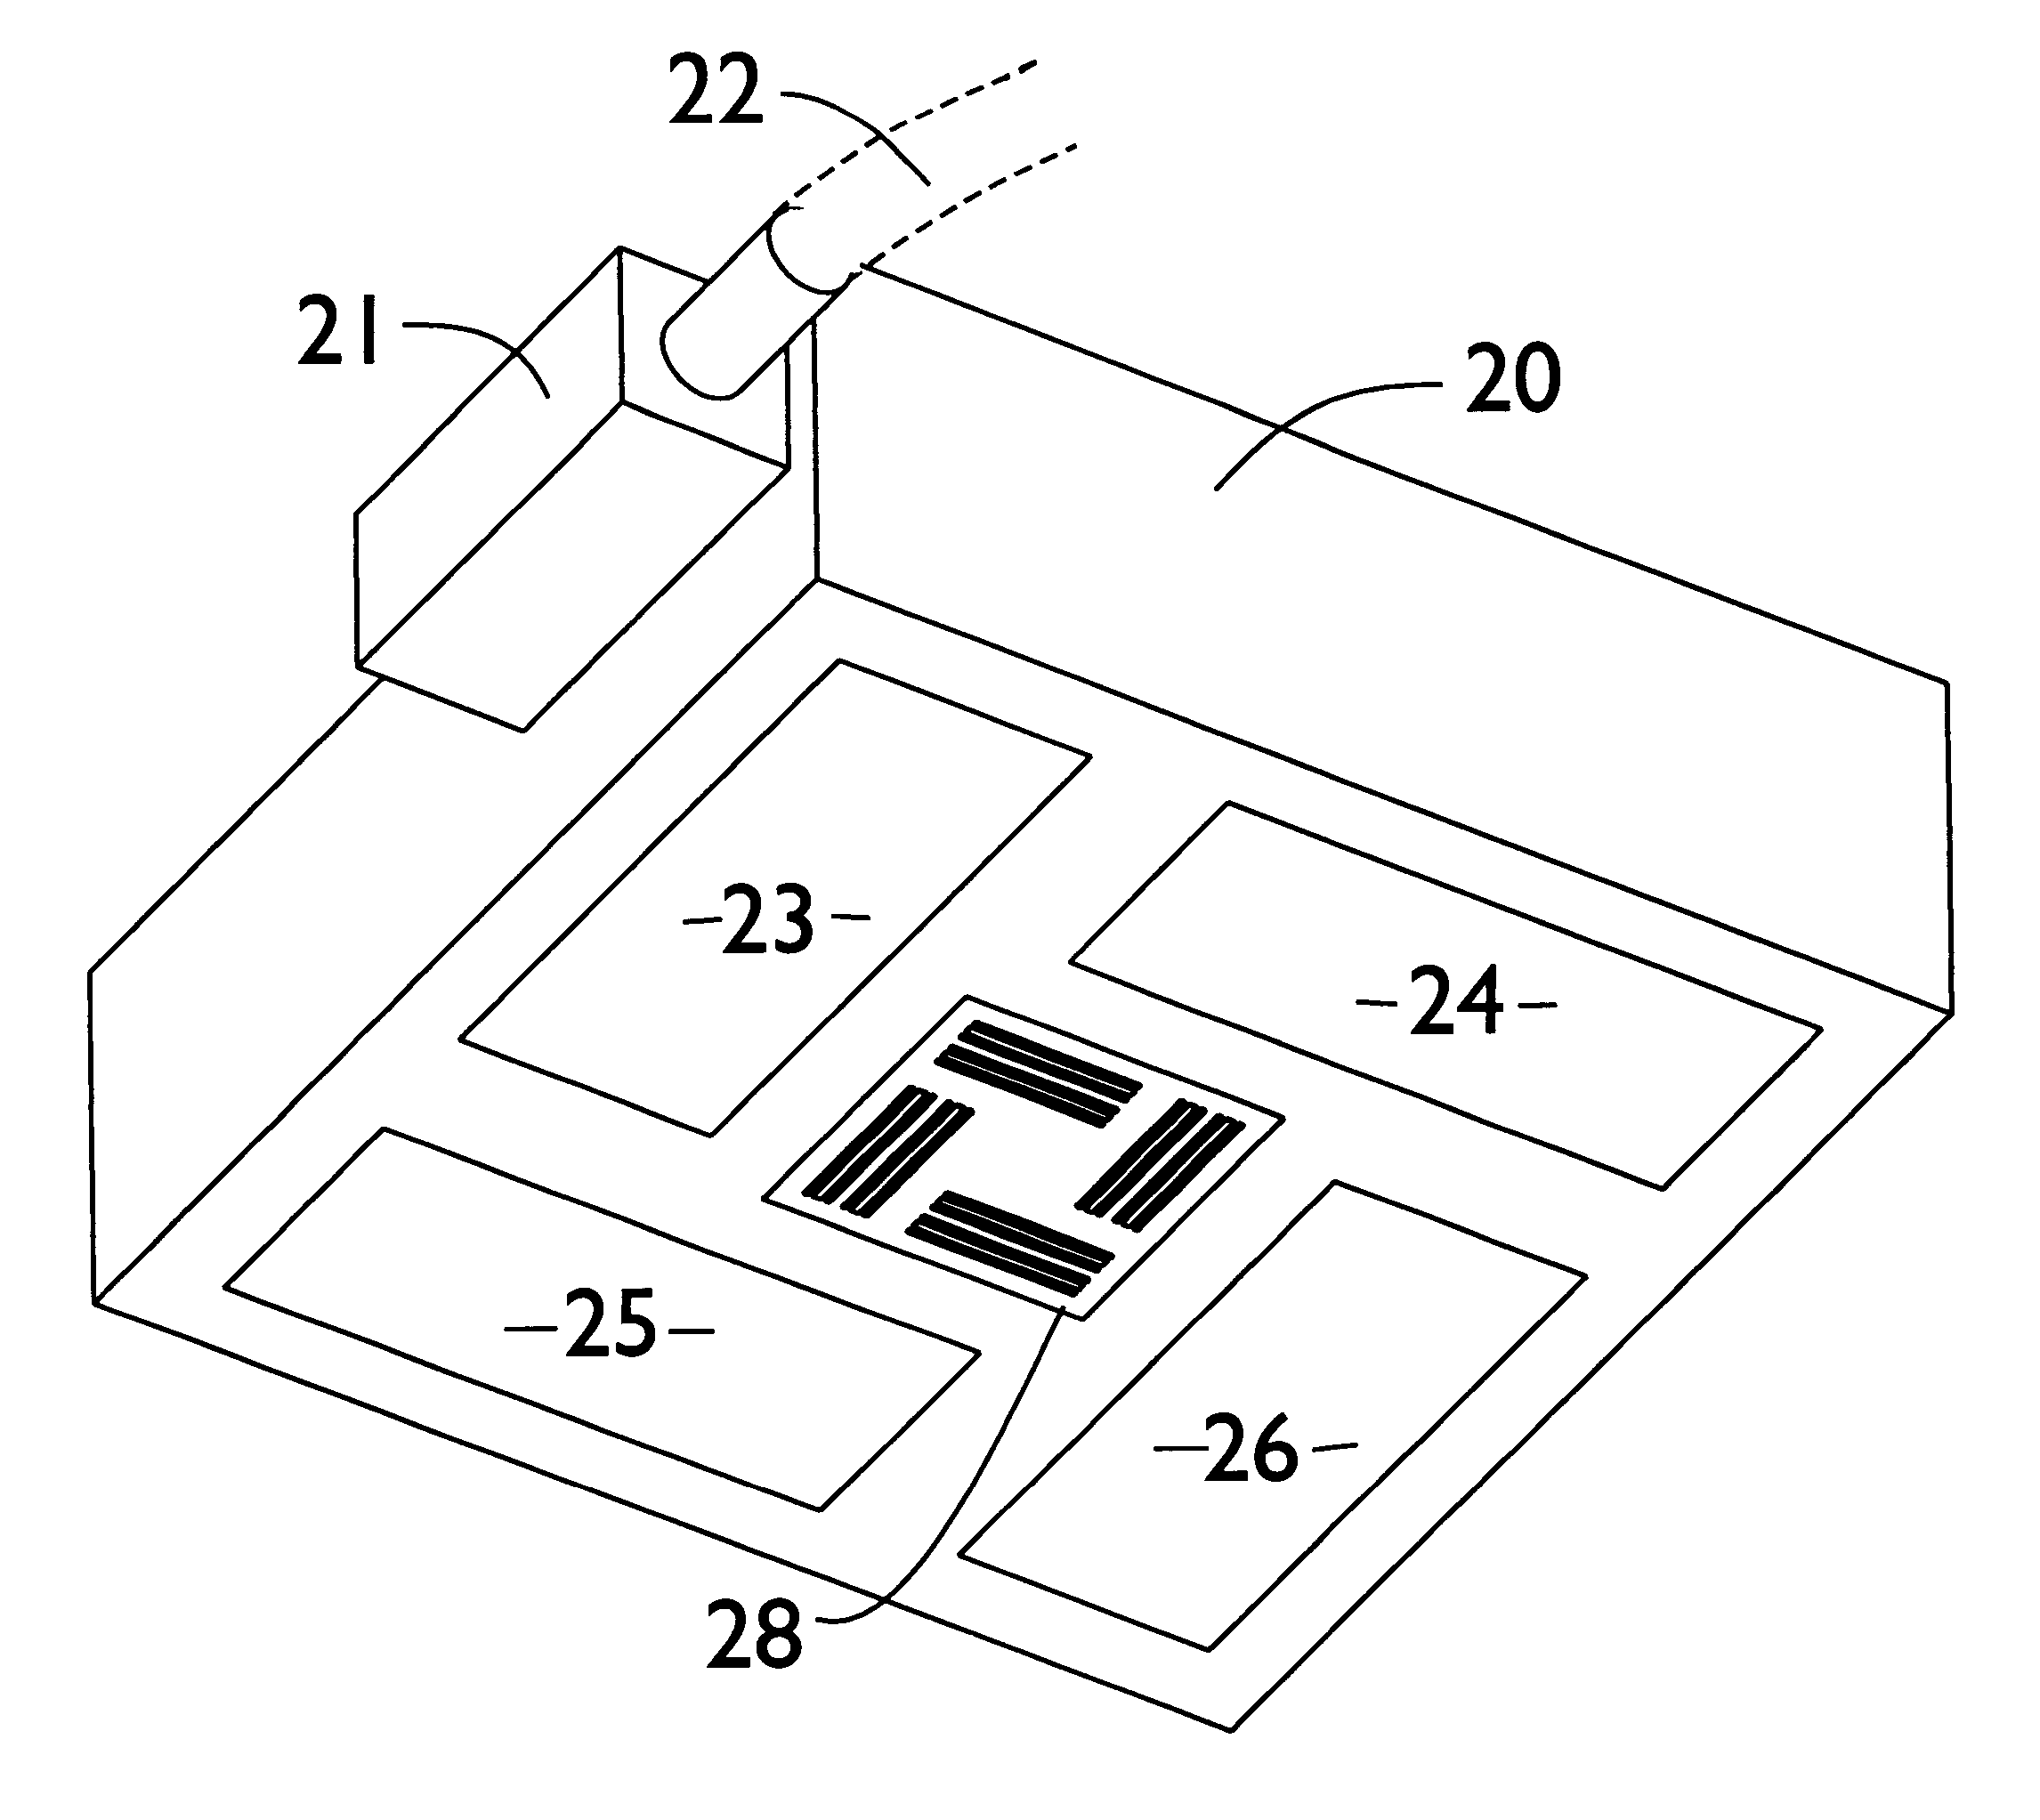 Closed-loop planar linear motor with integral monolithic three-degree-of-freedom AC-magnetic position/orientation sensor